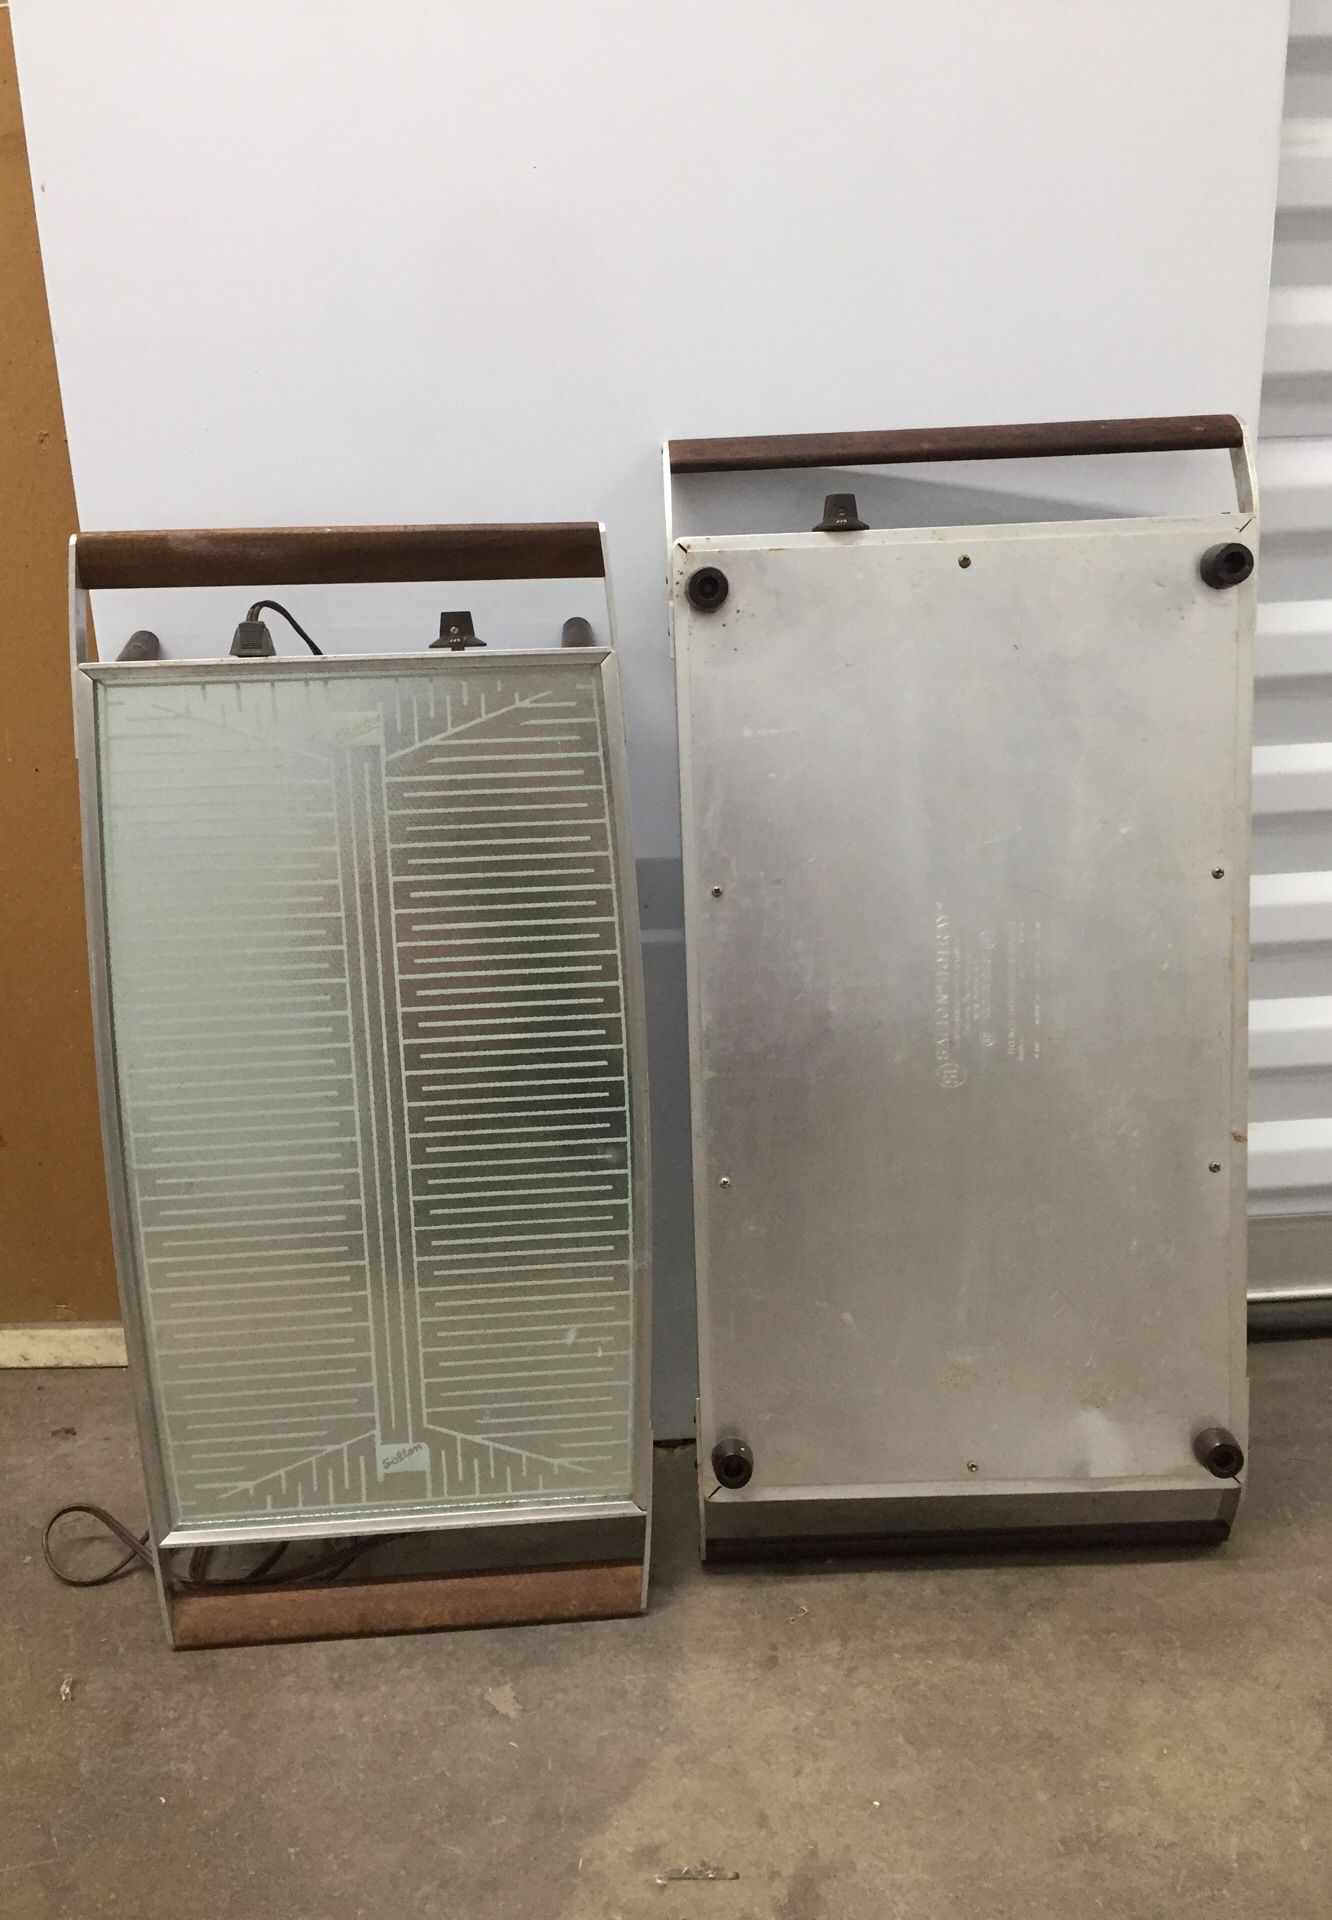 Two separate electric food warmer. $10.00 each in working condition. Two foot by one foot.